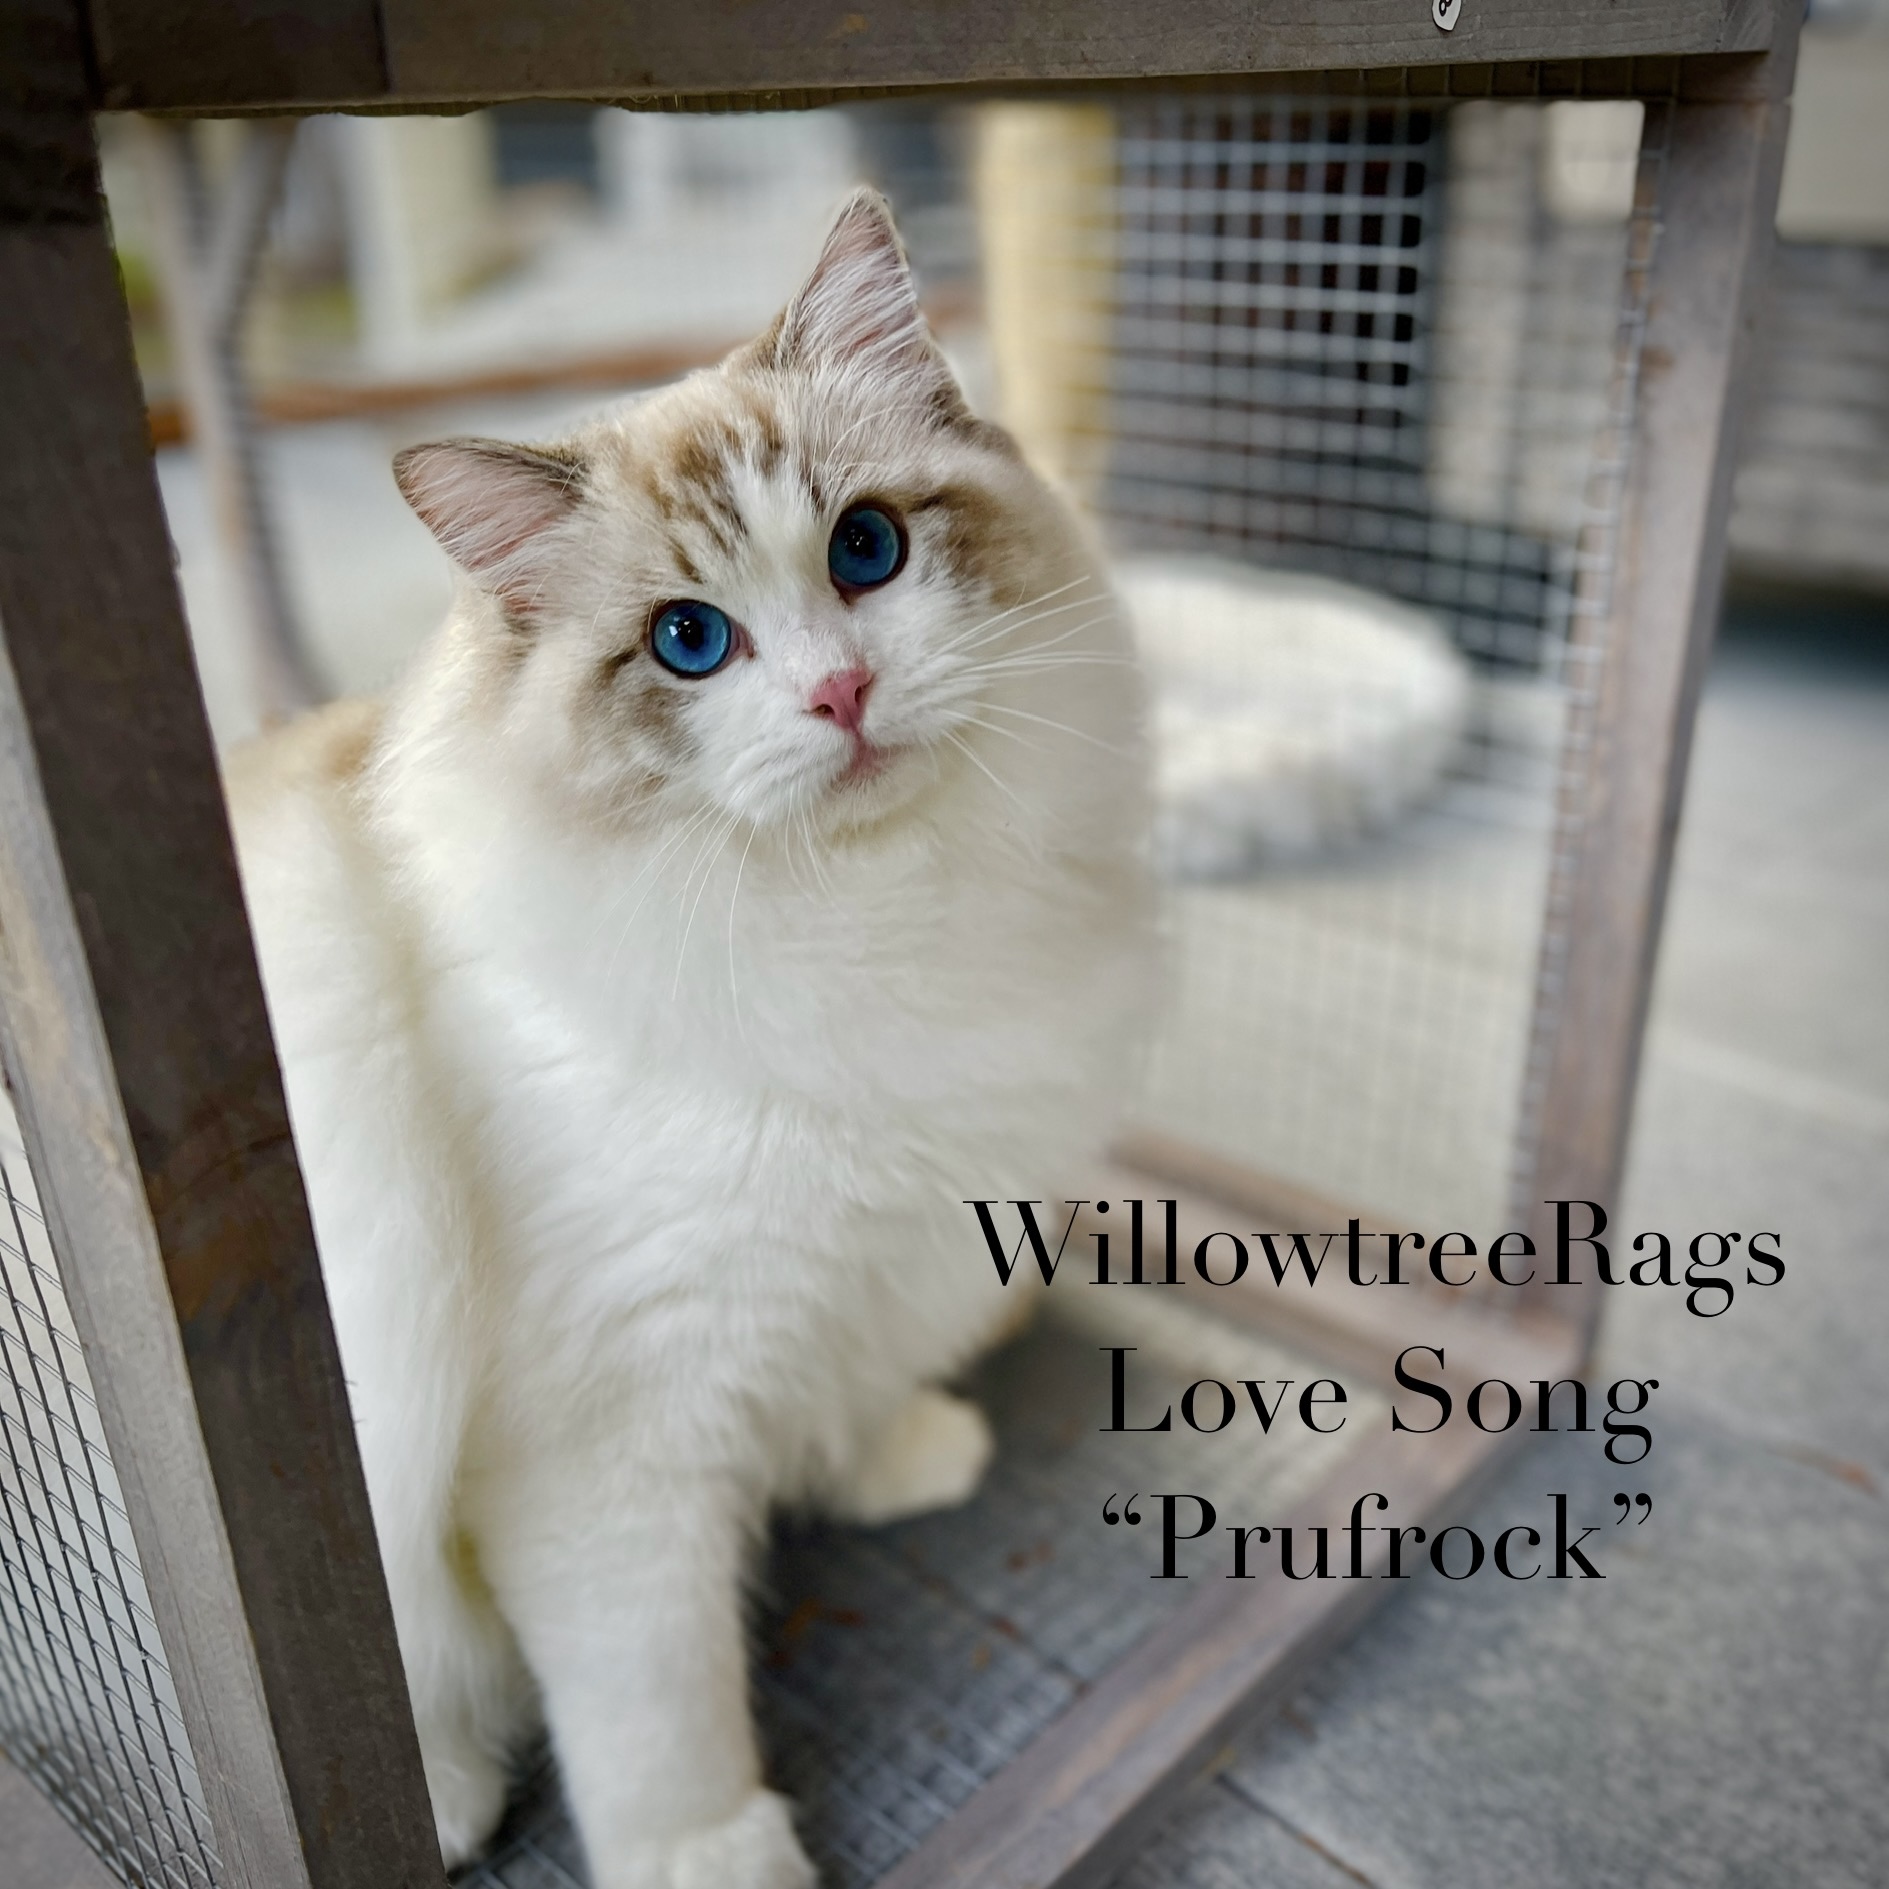 Willowtreerags Prufrock Show cat in catio cage